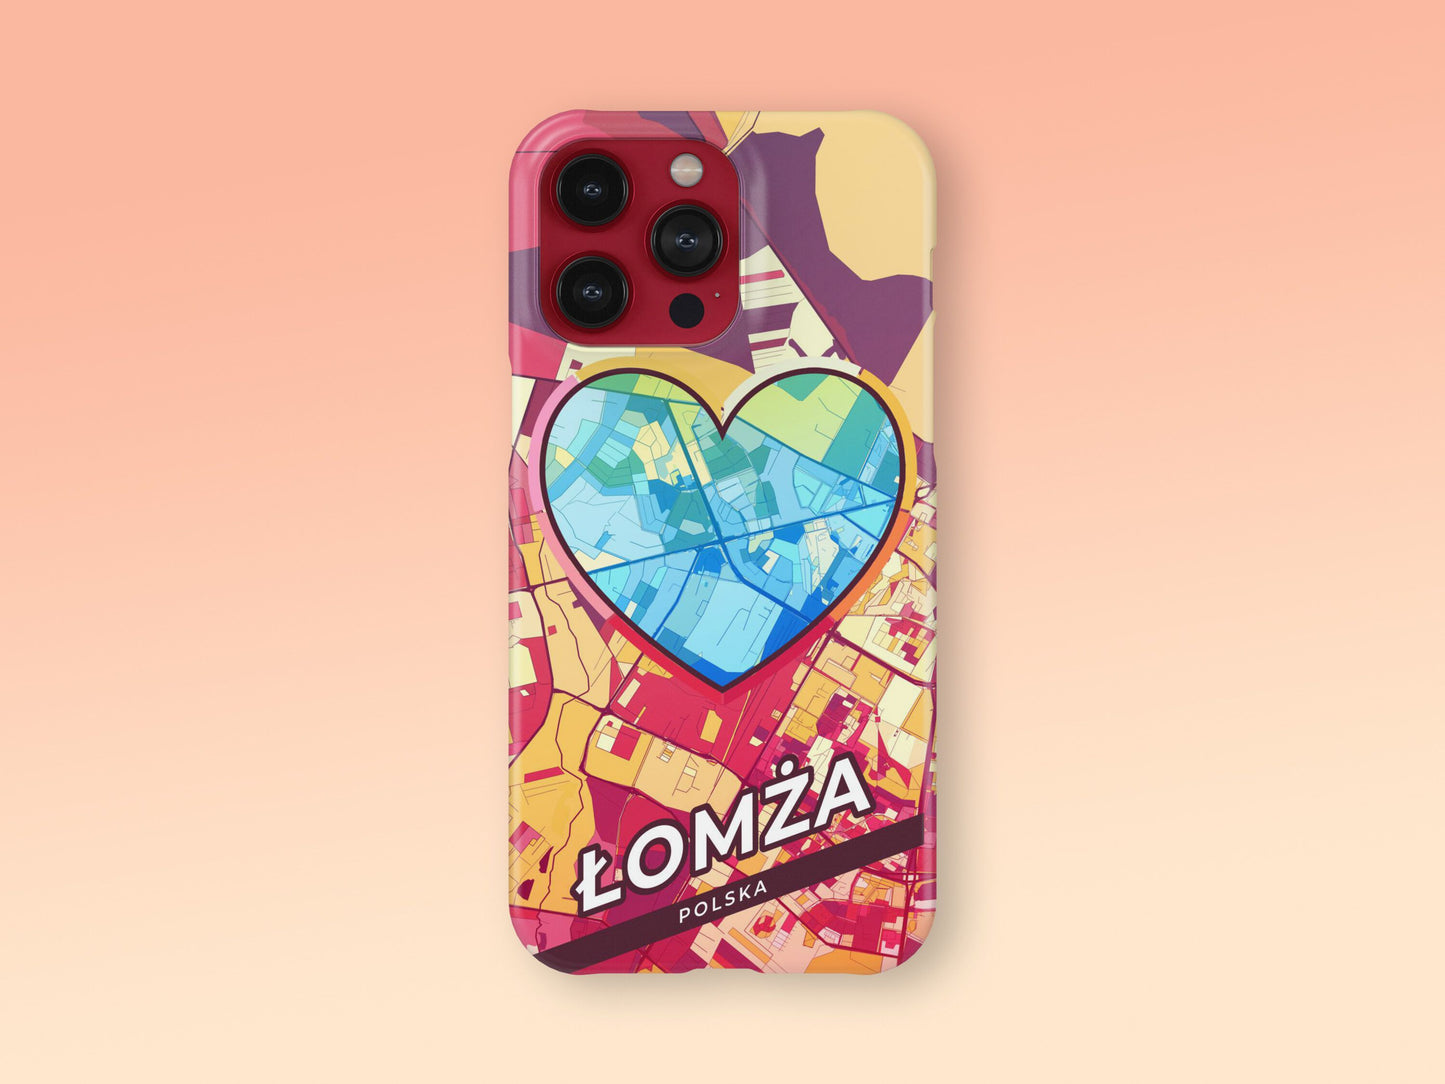 Łomża Poland slim phone case with colorful icon 2